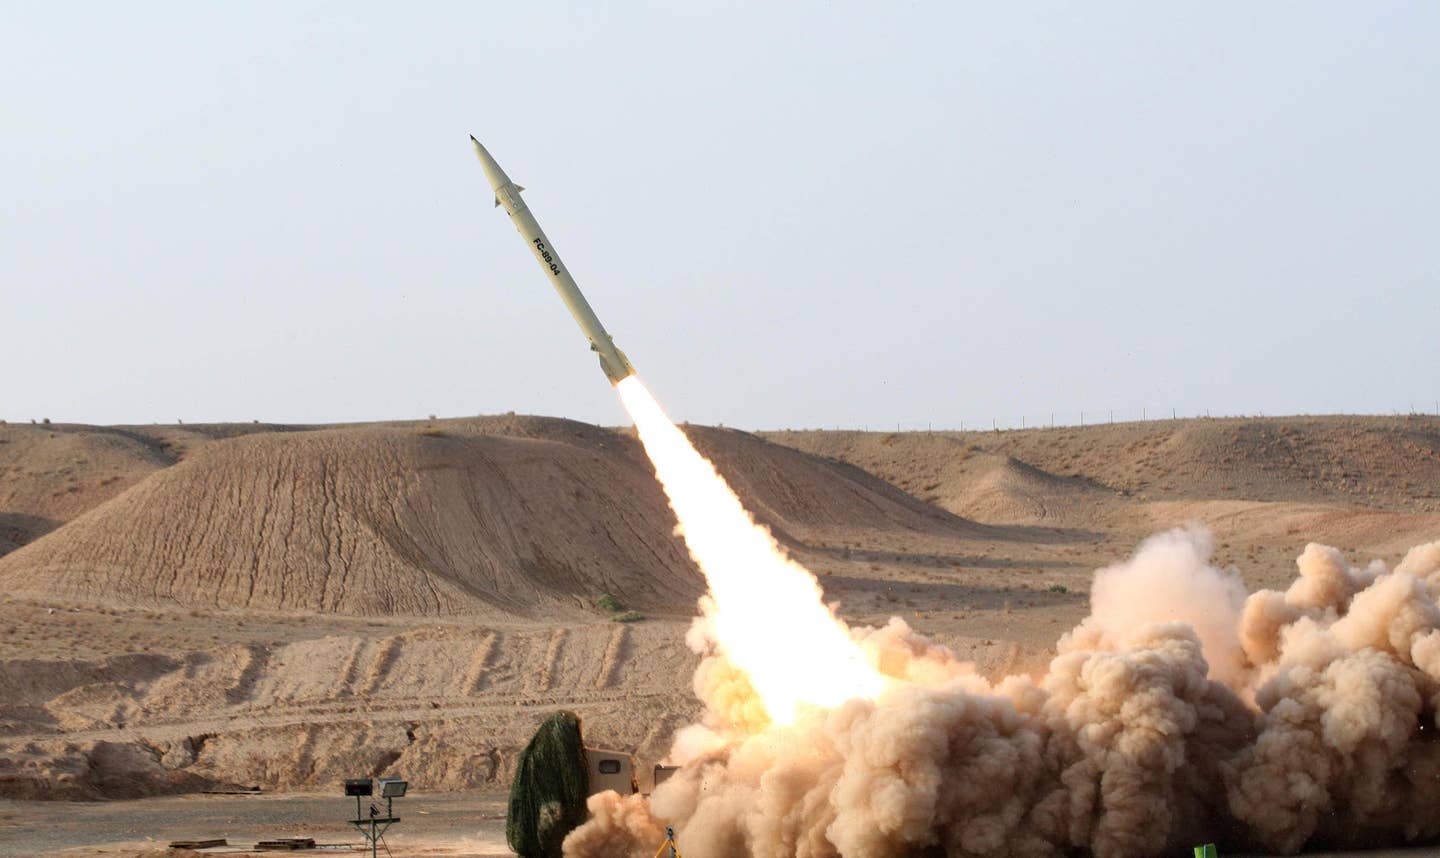 There is no indication of a pending deal for Iran to send Russia short-range ballistic missiles like this Fateh-110, a spokesman for the National Security Council said Wednesday. (Photo by Mohsen Shandiz/Corbis via Getty Images)